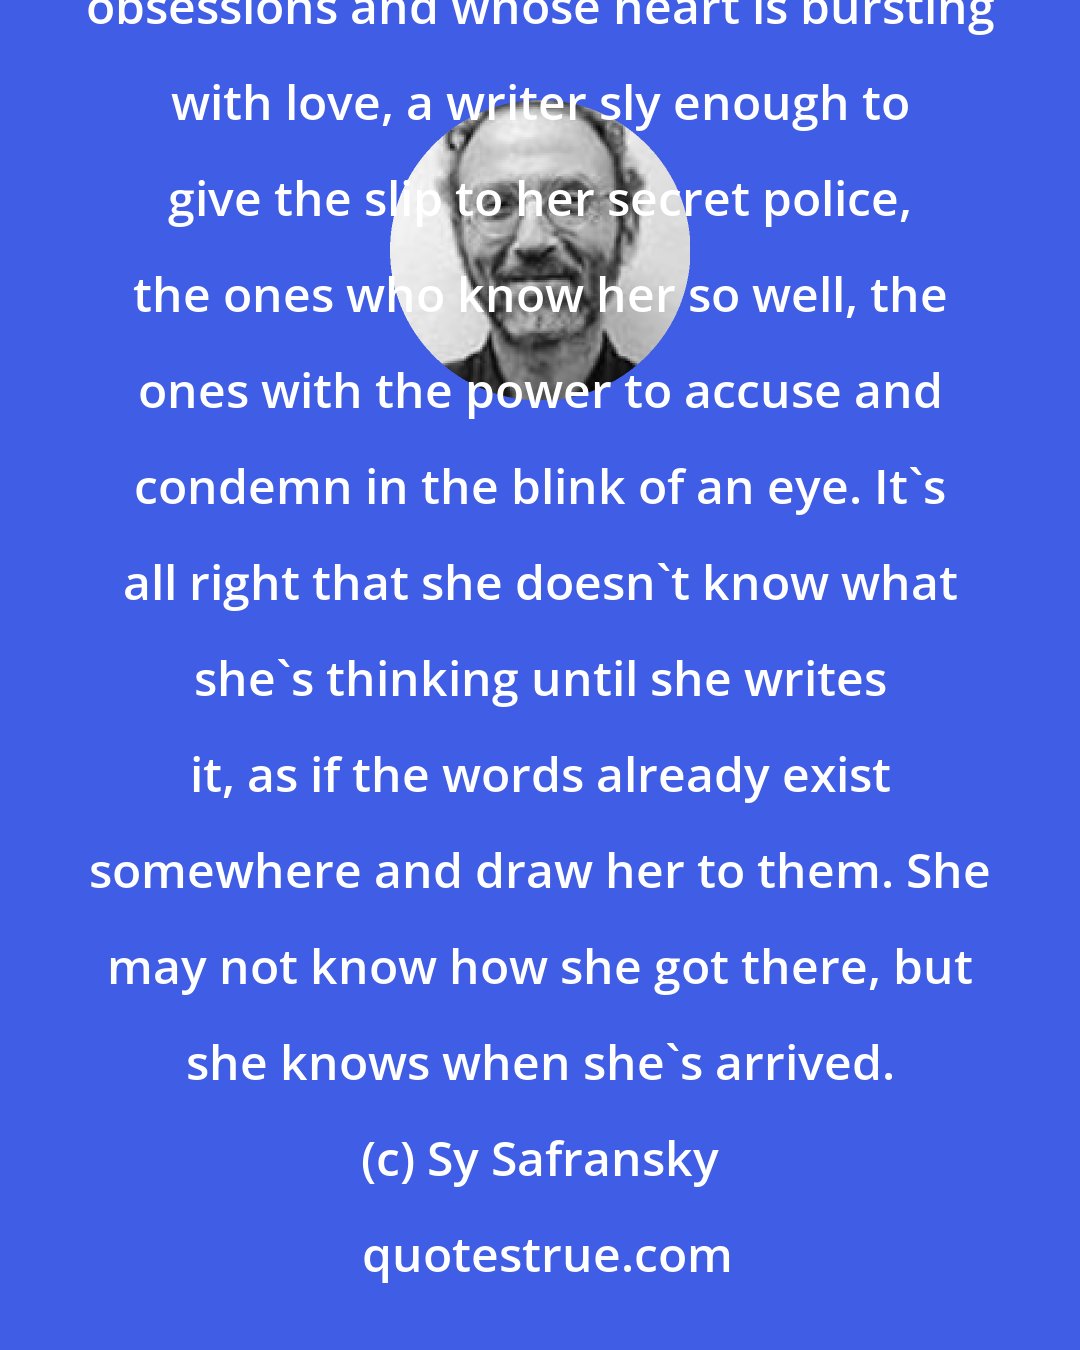 Sy Safransky: I'm looking for a writer who doesn't know where the sentence is leading her; a writer who starts with her obsessions and whose heart is bursting with love, a writer sly enough to give the slip to her secret police, the ones who know her so well, the ones with the power to accuse and condemn in the blink of an eye. It's all right that she doesn't know what she's thinking until she writes it, as if the words already exist somewhere and draw her to them. She may not know how she got there, but she knows when she's arrived.